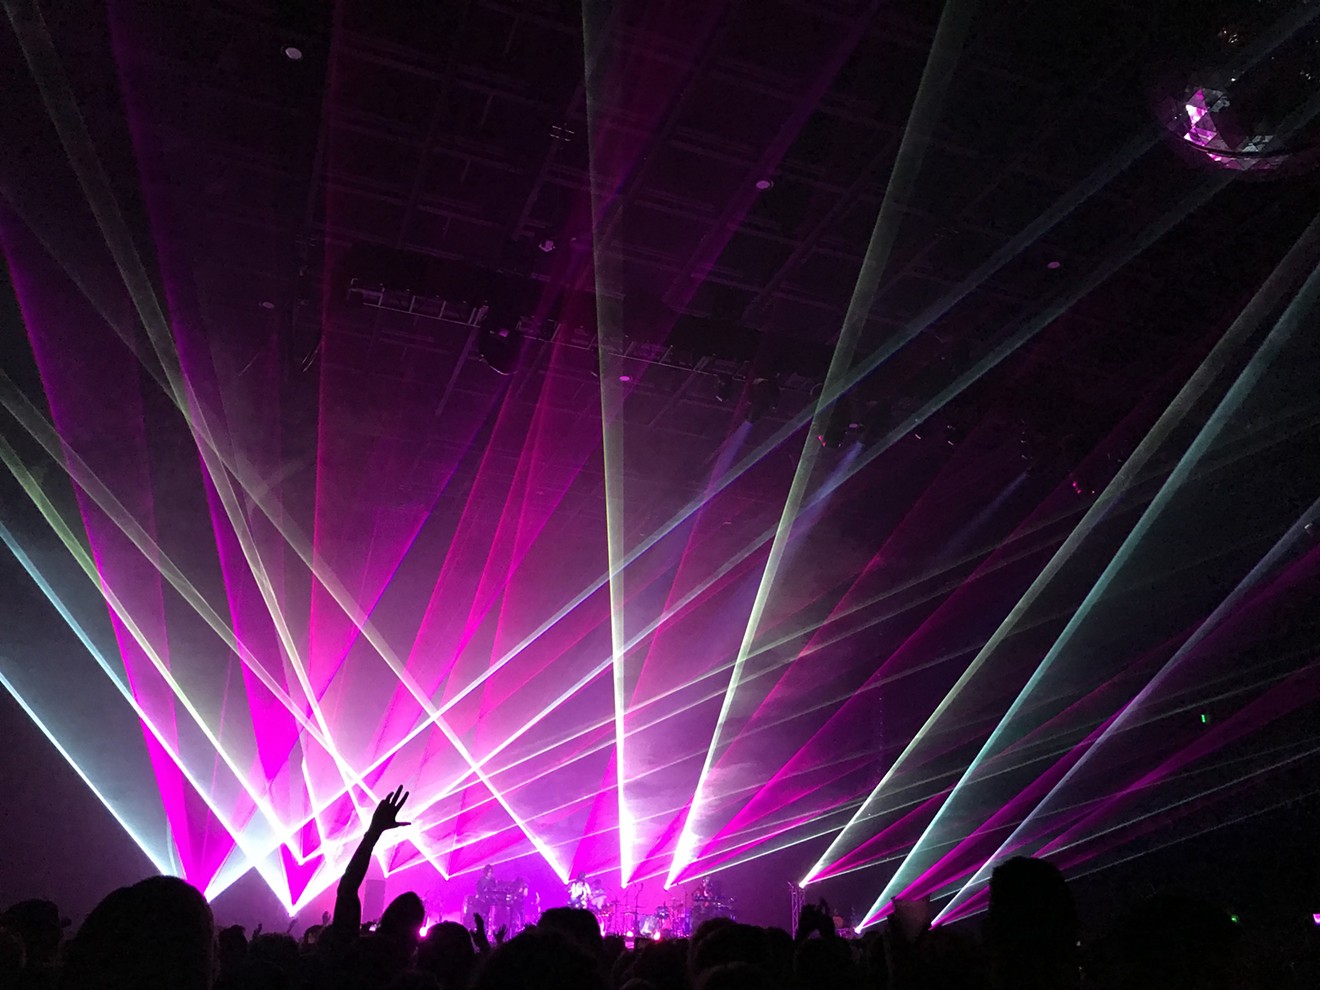 Tame Impala had an impressive array of lasers at the Mission Ballroom on October 7.